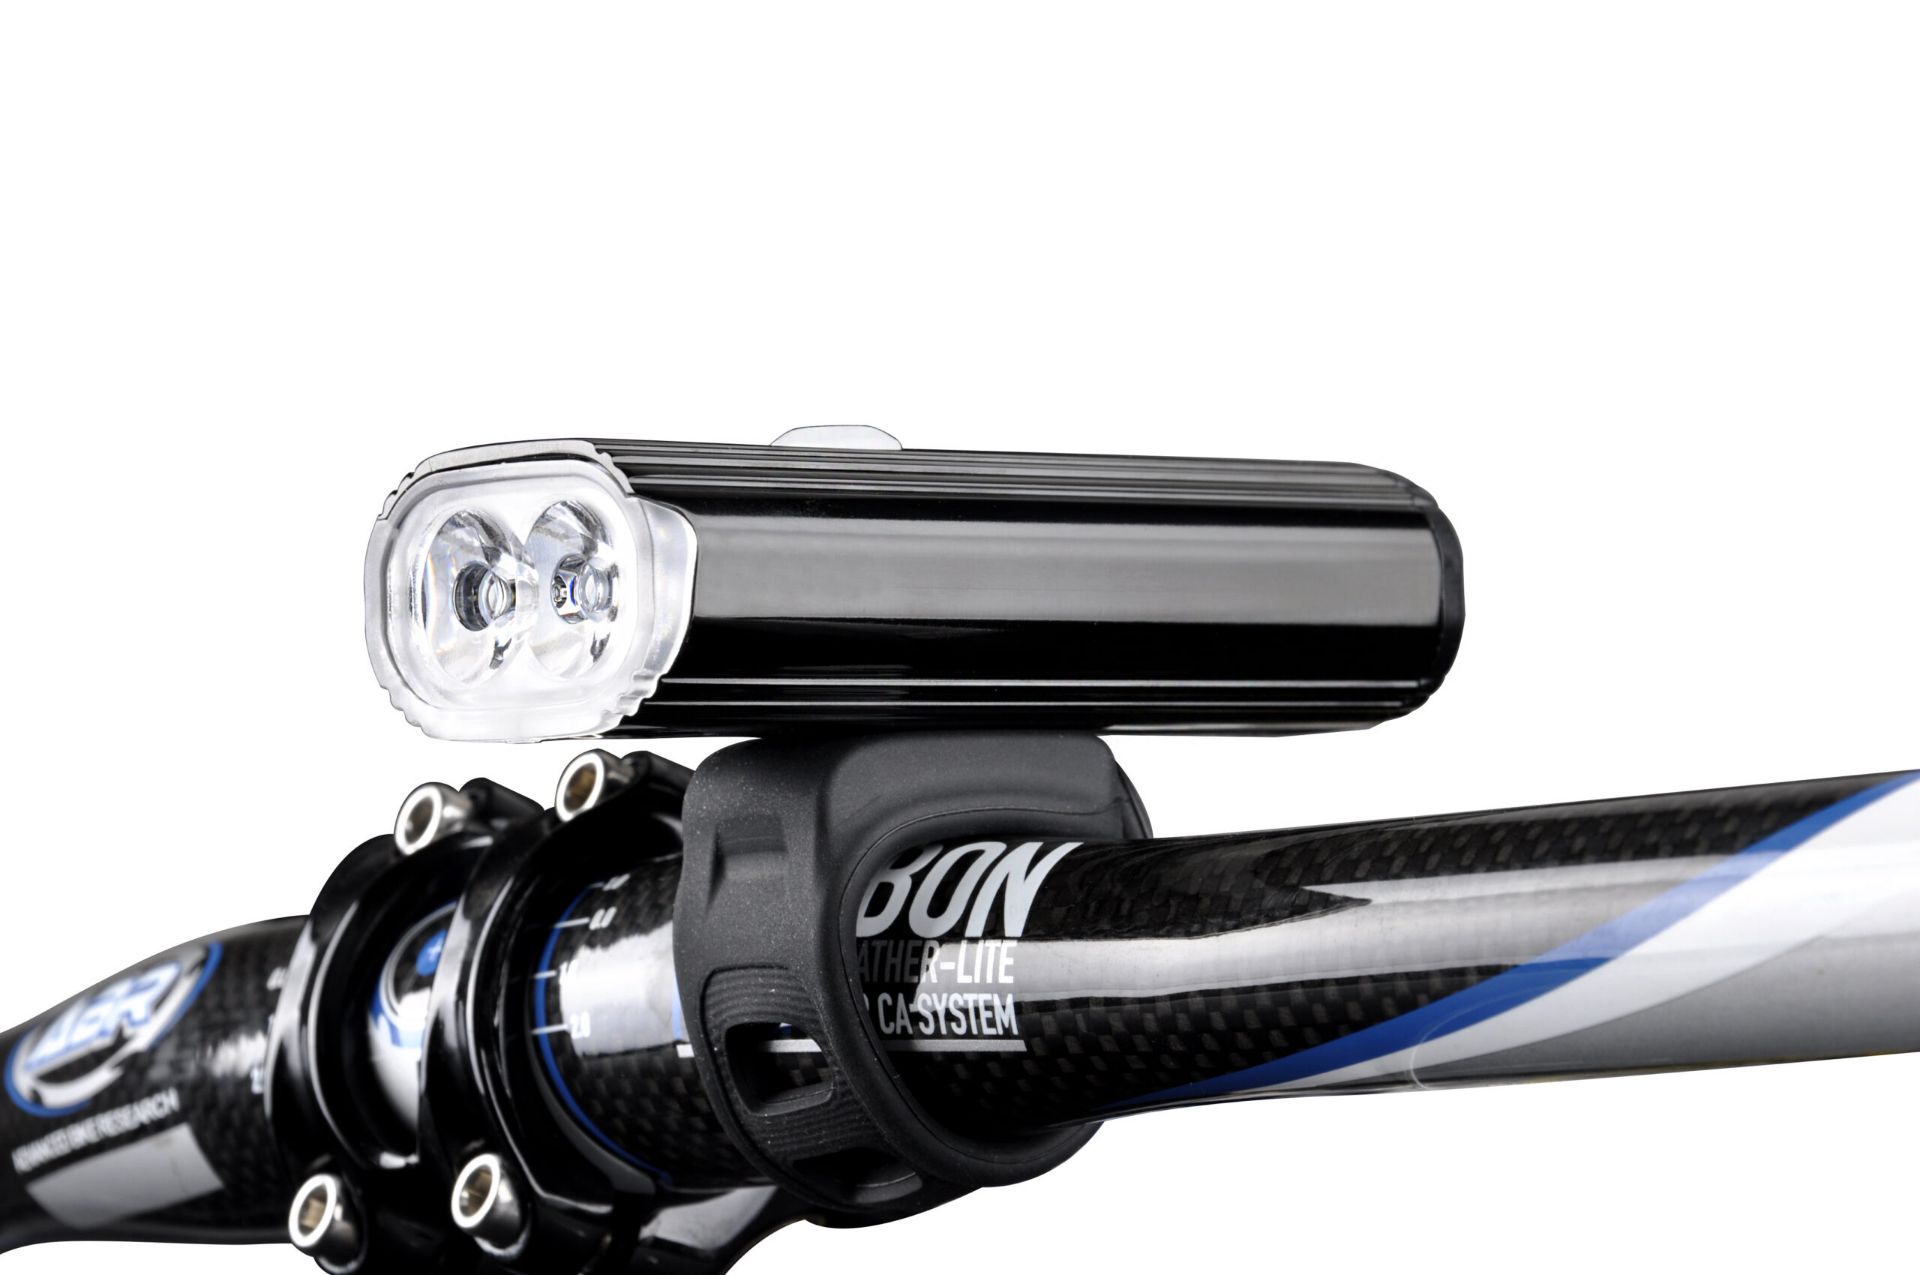 UNITS - RBSM SPORTS BIKE FRONT & REAR RECHARGEABLE LIGHT SETS (NEW IN BOX) (MSRP $70/SET) - Image 2 of 6